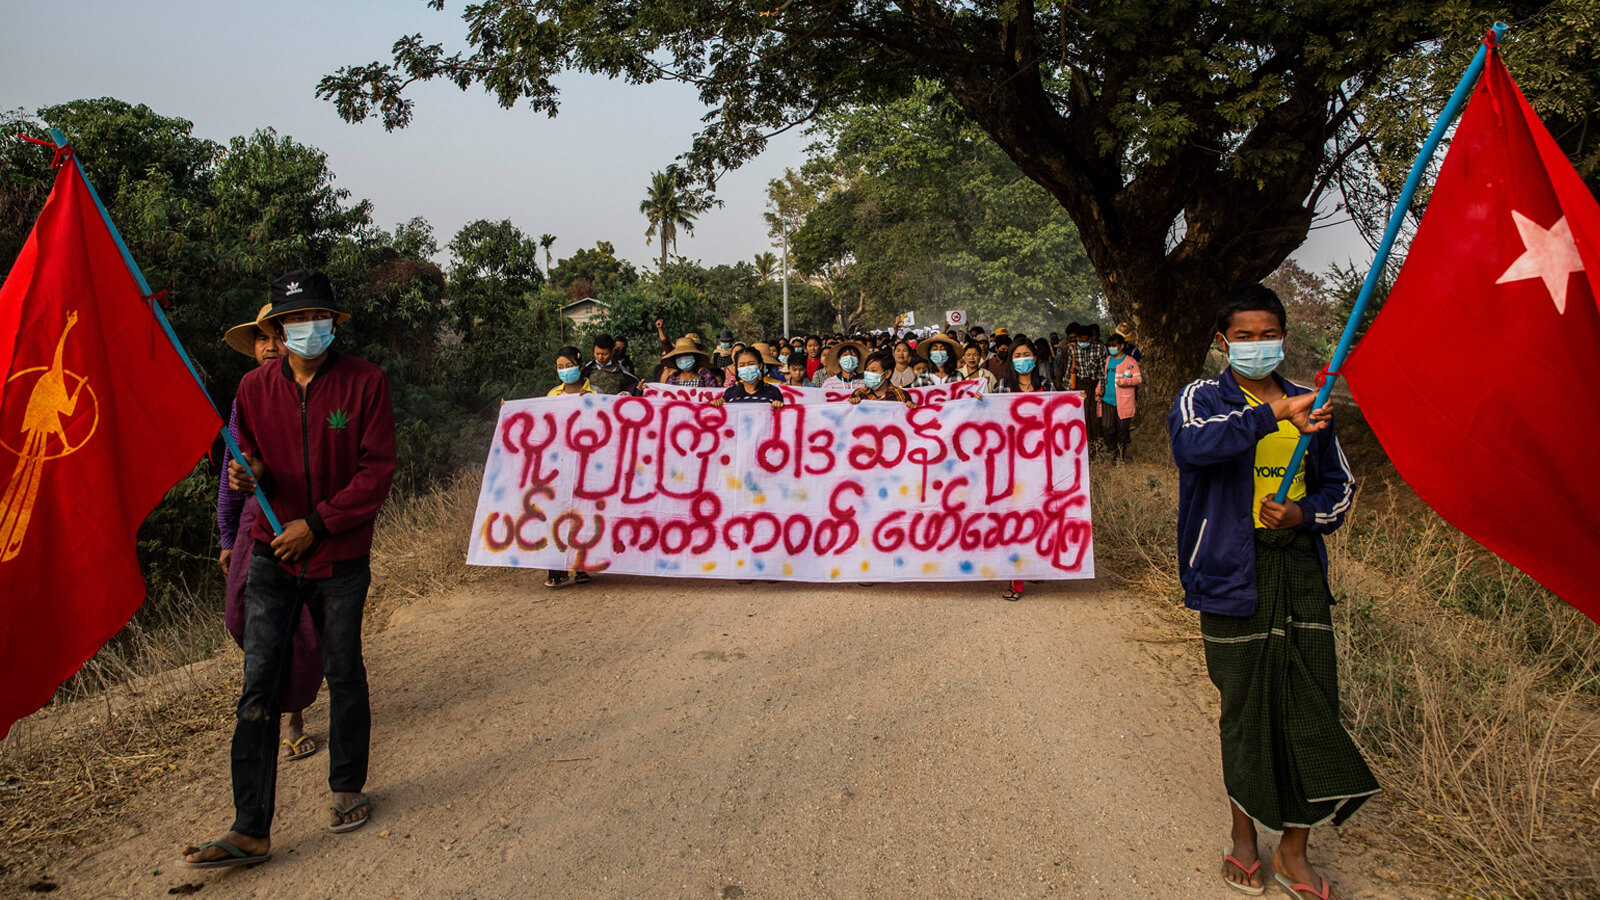 Image of protesters in Myanmar marching during a demonstration against the military coup